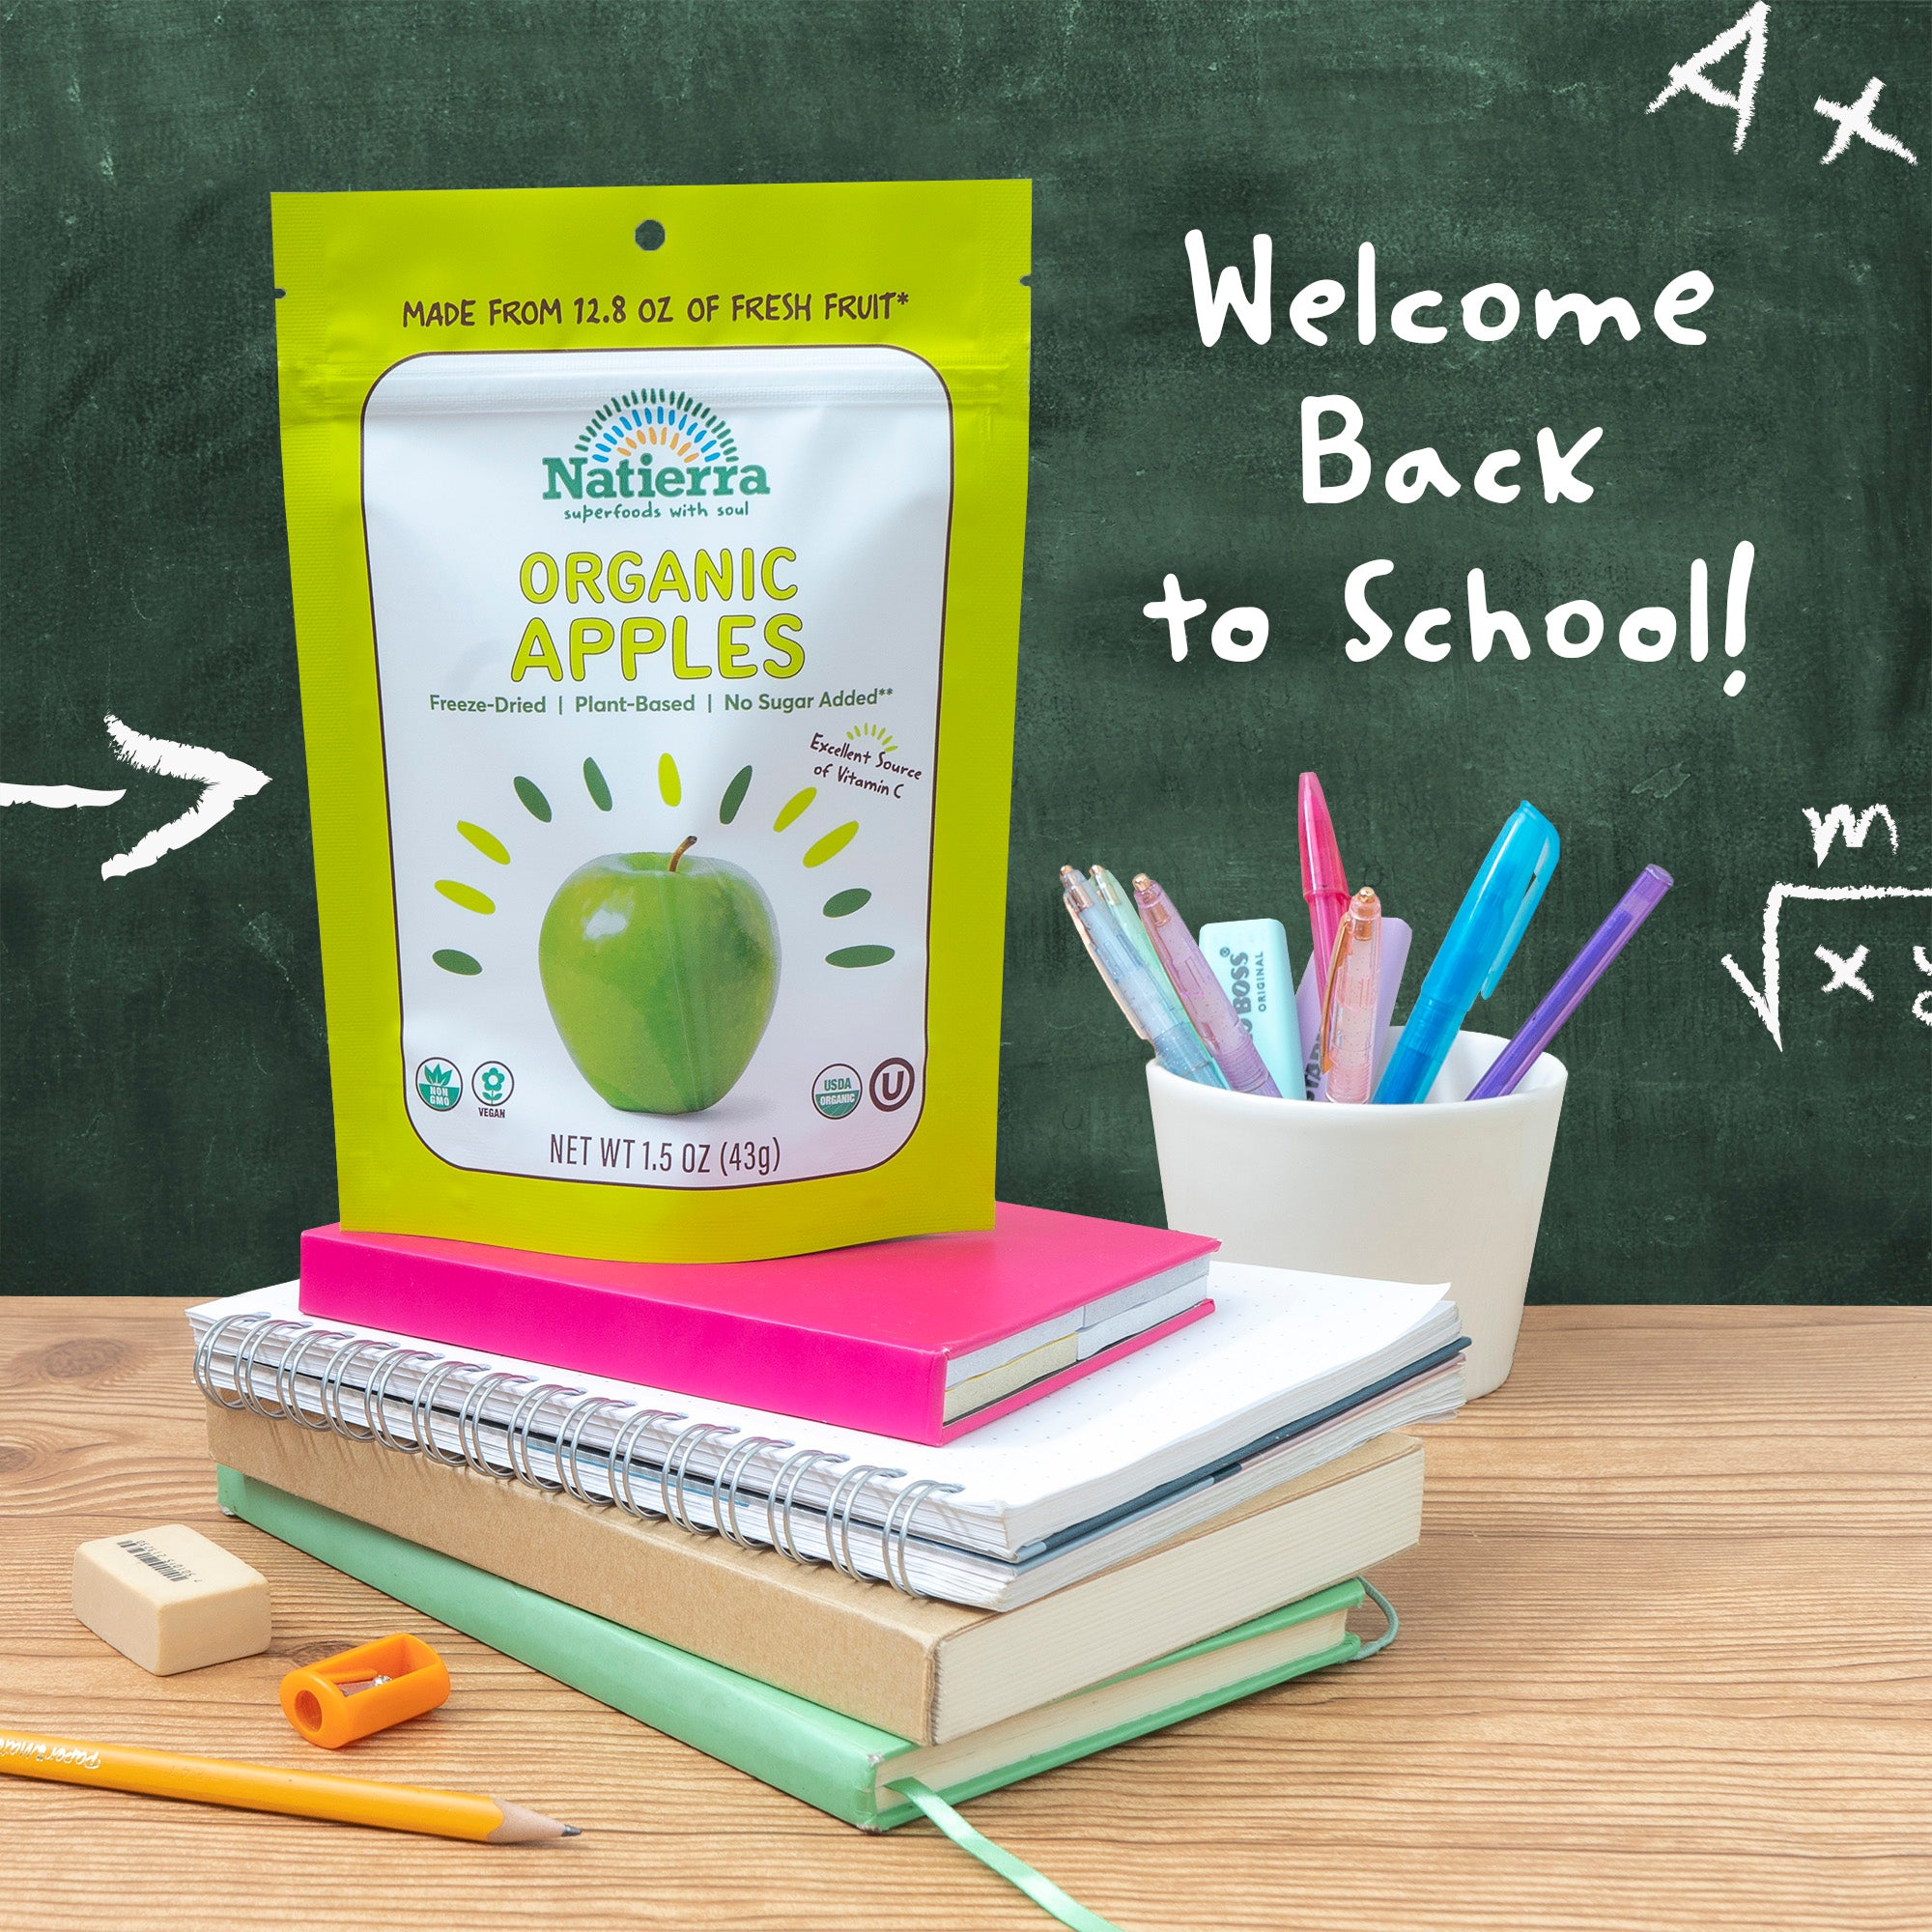 Organic freeze-dried apples on top of school material